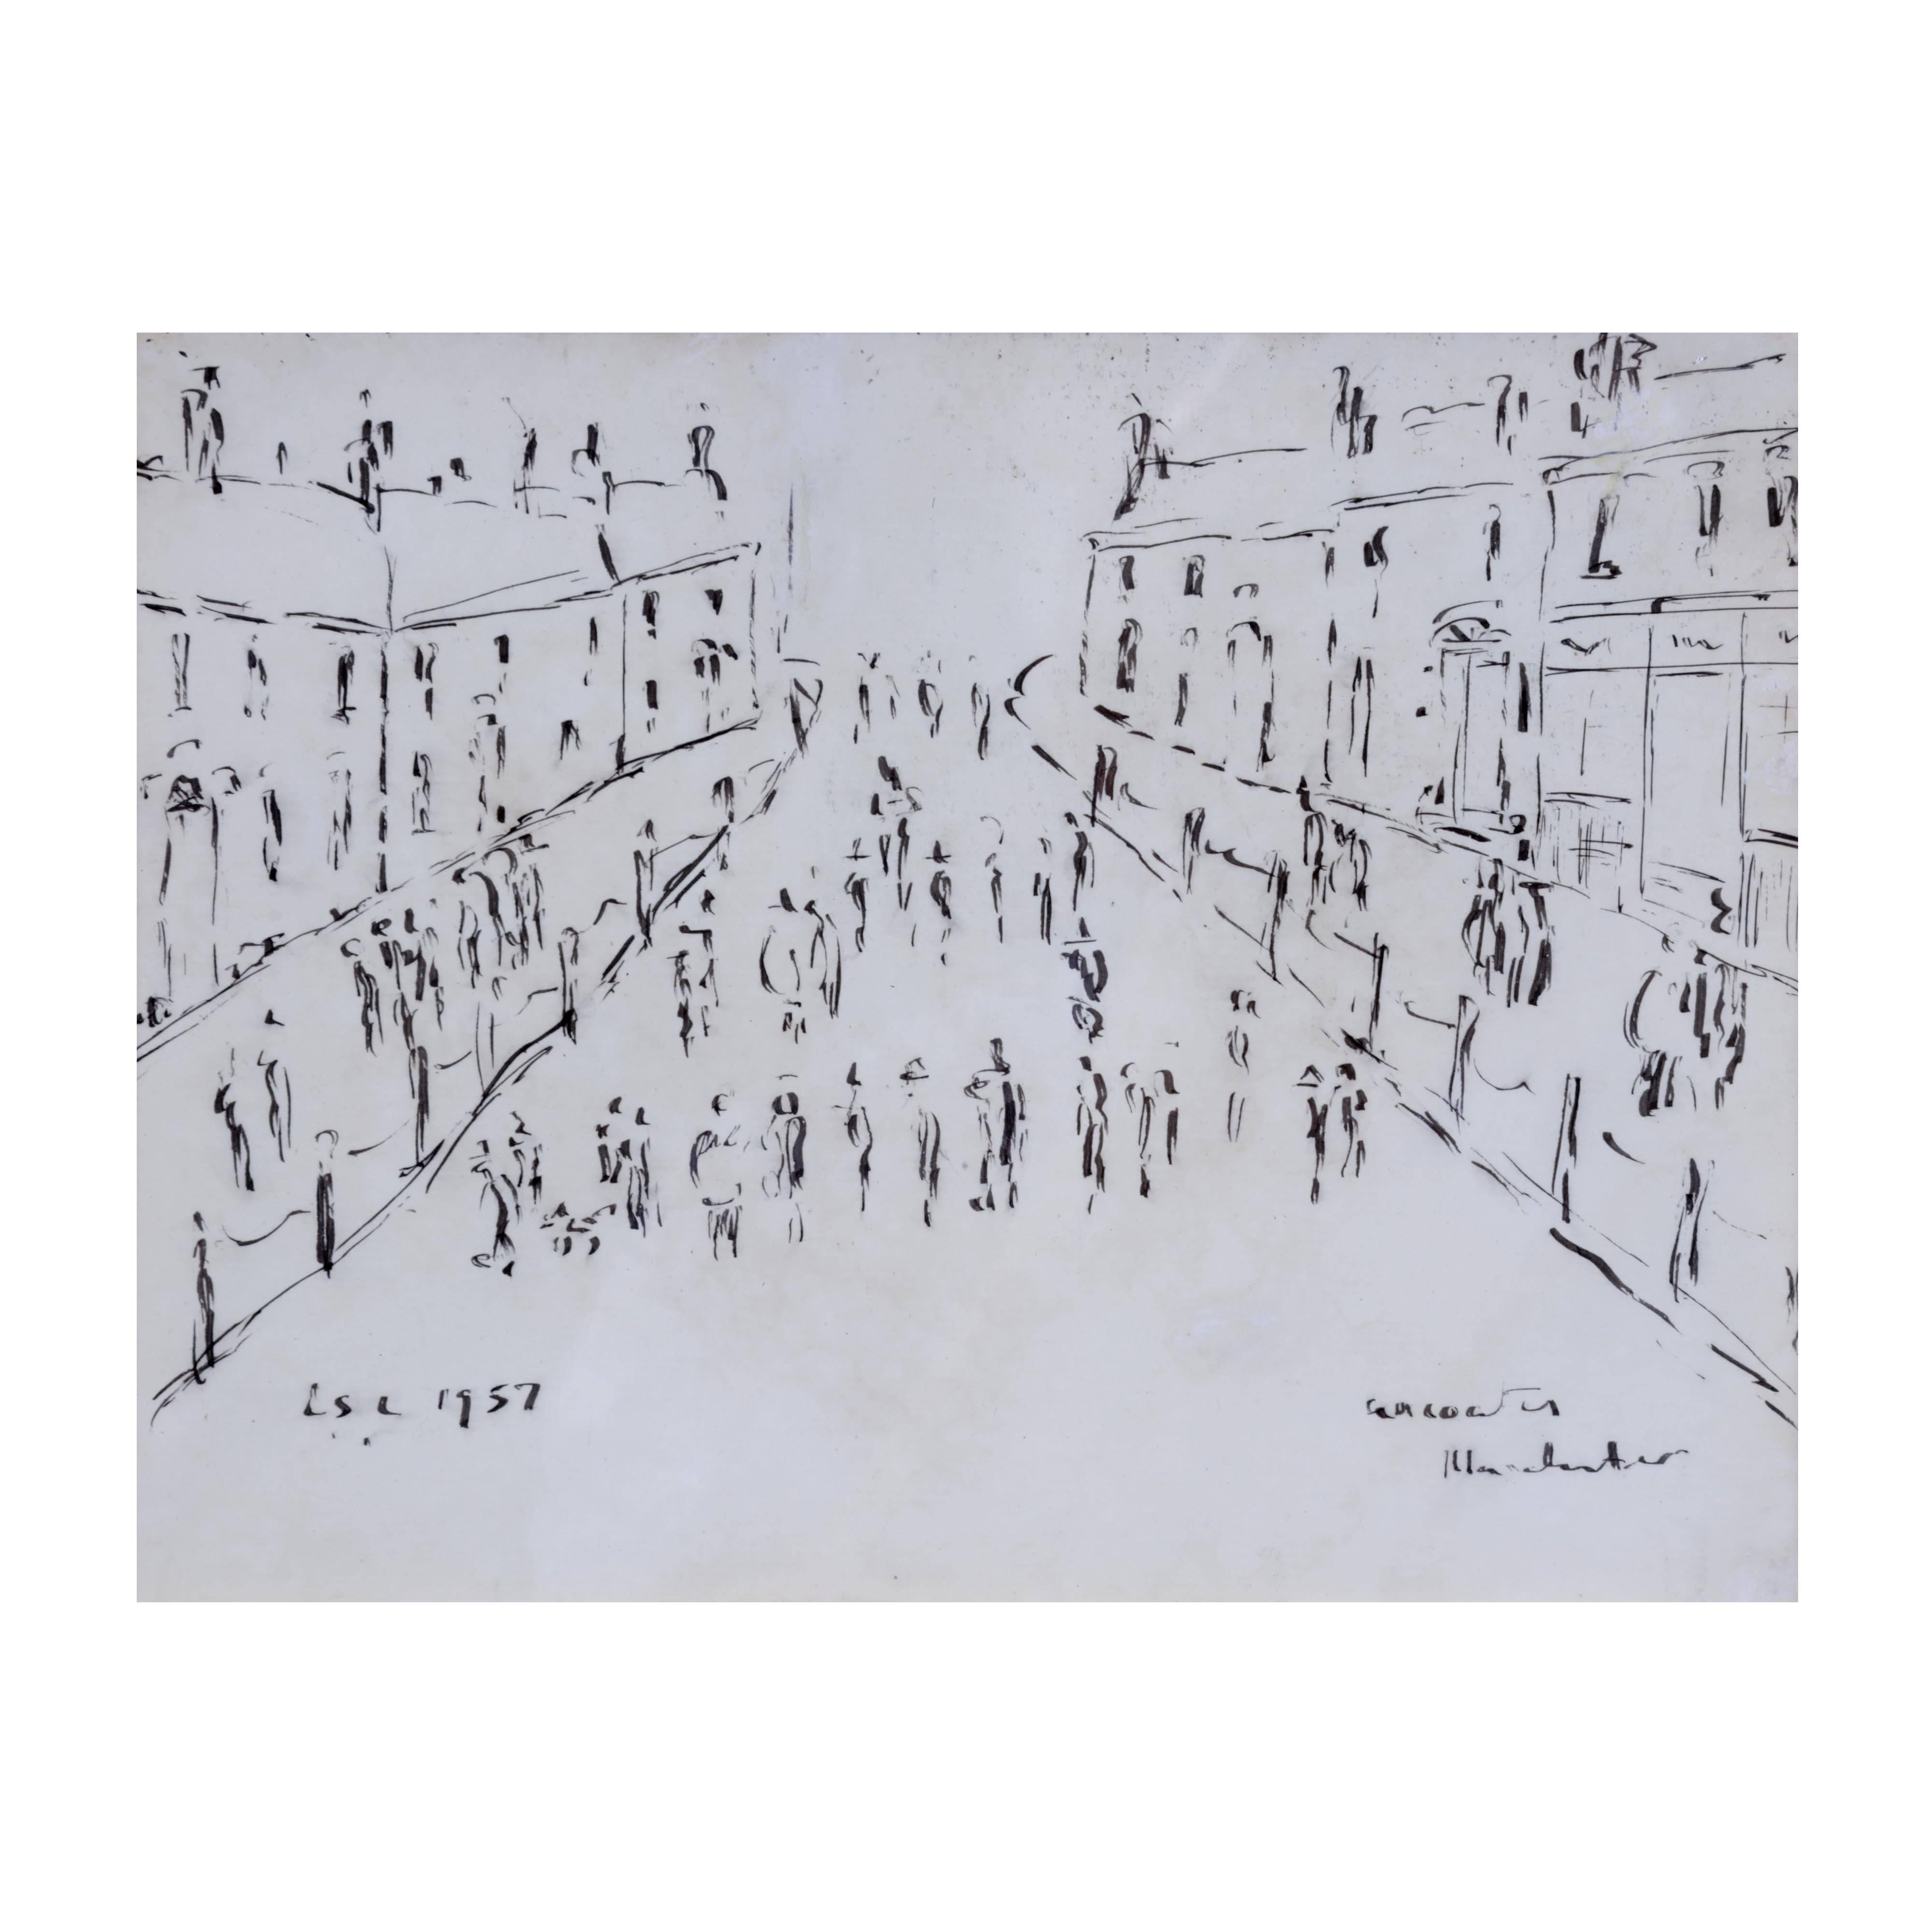 A street scene of Ancoats in Manchester drawn quickly and impulsively by one of Britain’s most famous artists - L.S. Lowry.

Further Information: Born in Rusholme, Manchester in November 1887, L.S. Lowry is unquestionably the most celebrated of